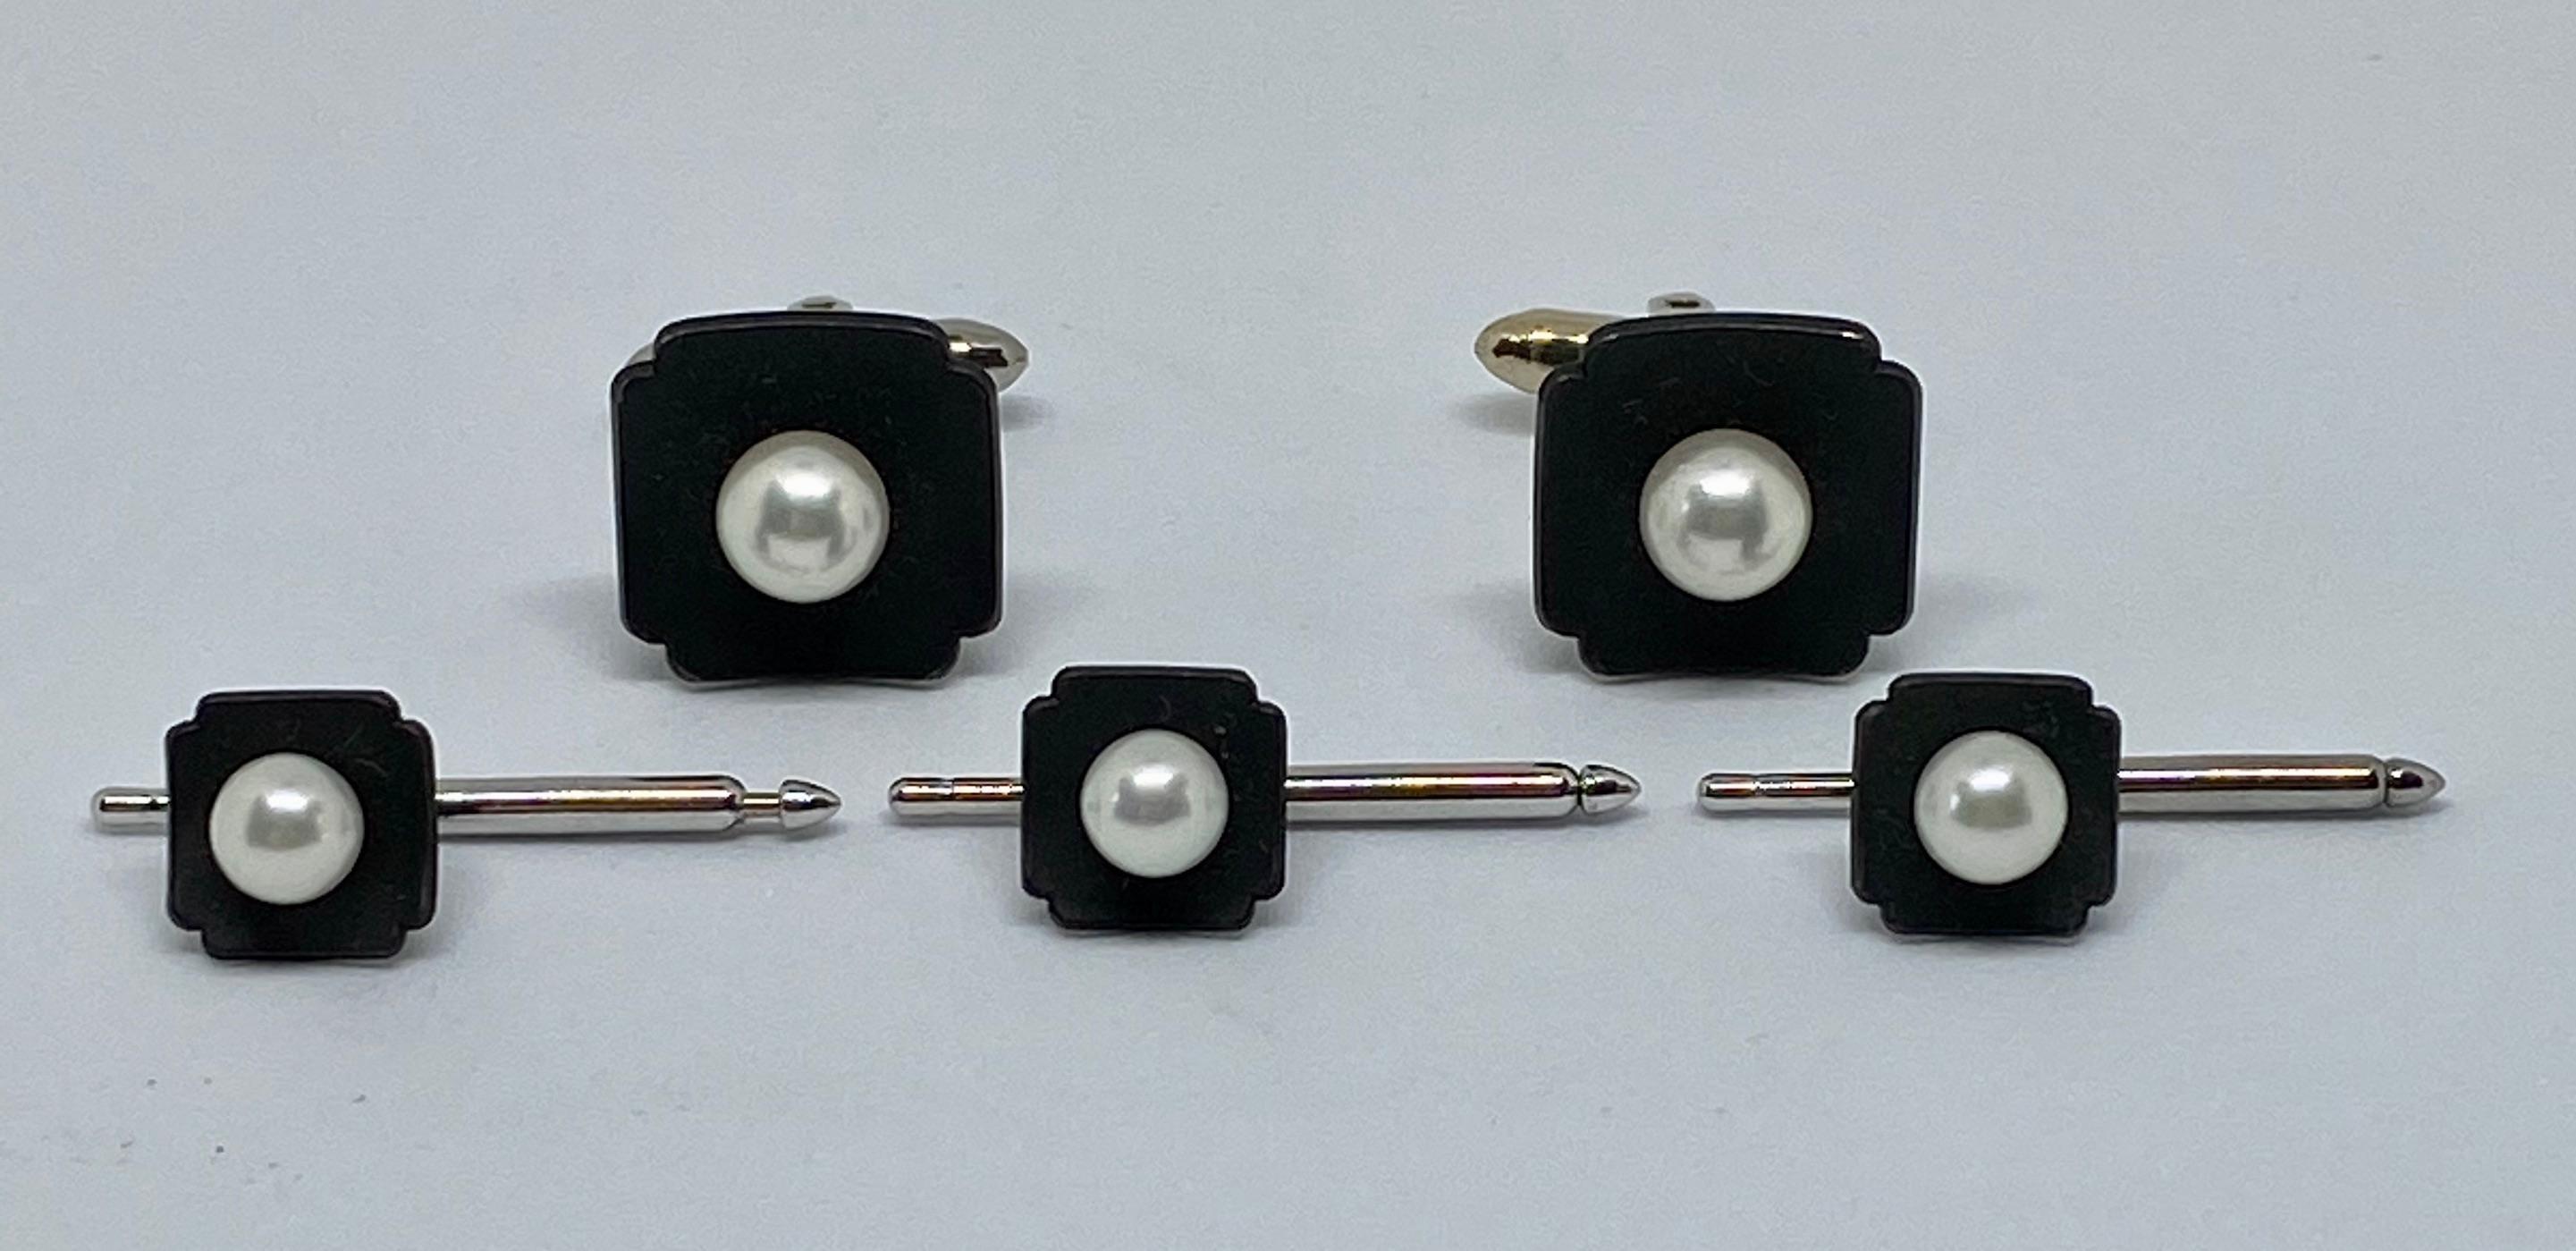 Beautiful, original and highly collectible G.T. Marsh & Company dress set comprised of cufflinks and three matching shirt studs in oxidized steel with round, white cultured pearls and 14K white gold fittings. 

In the 19th Century, G.T. Marsh, an